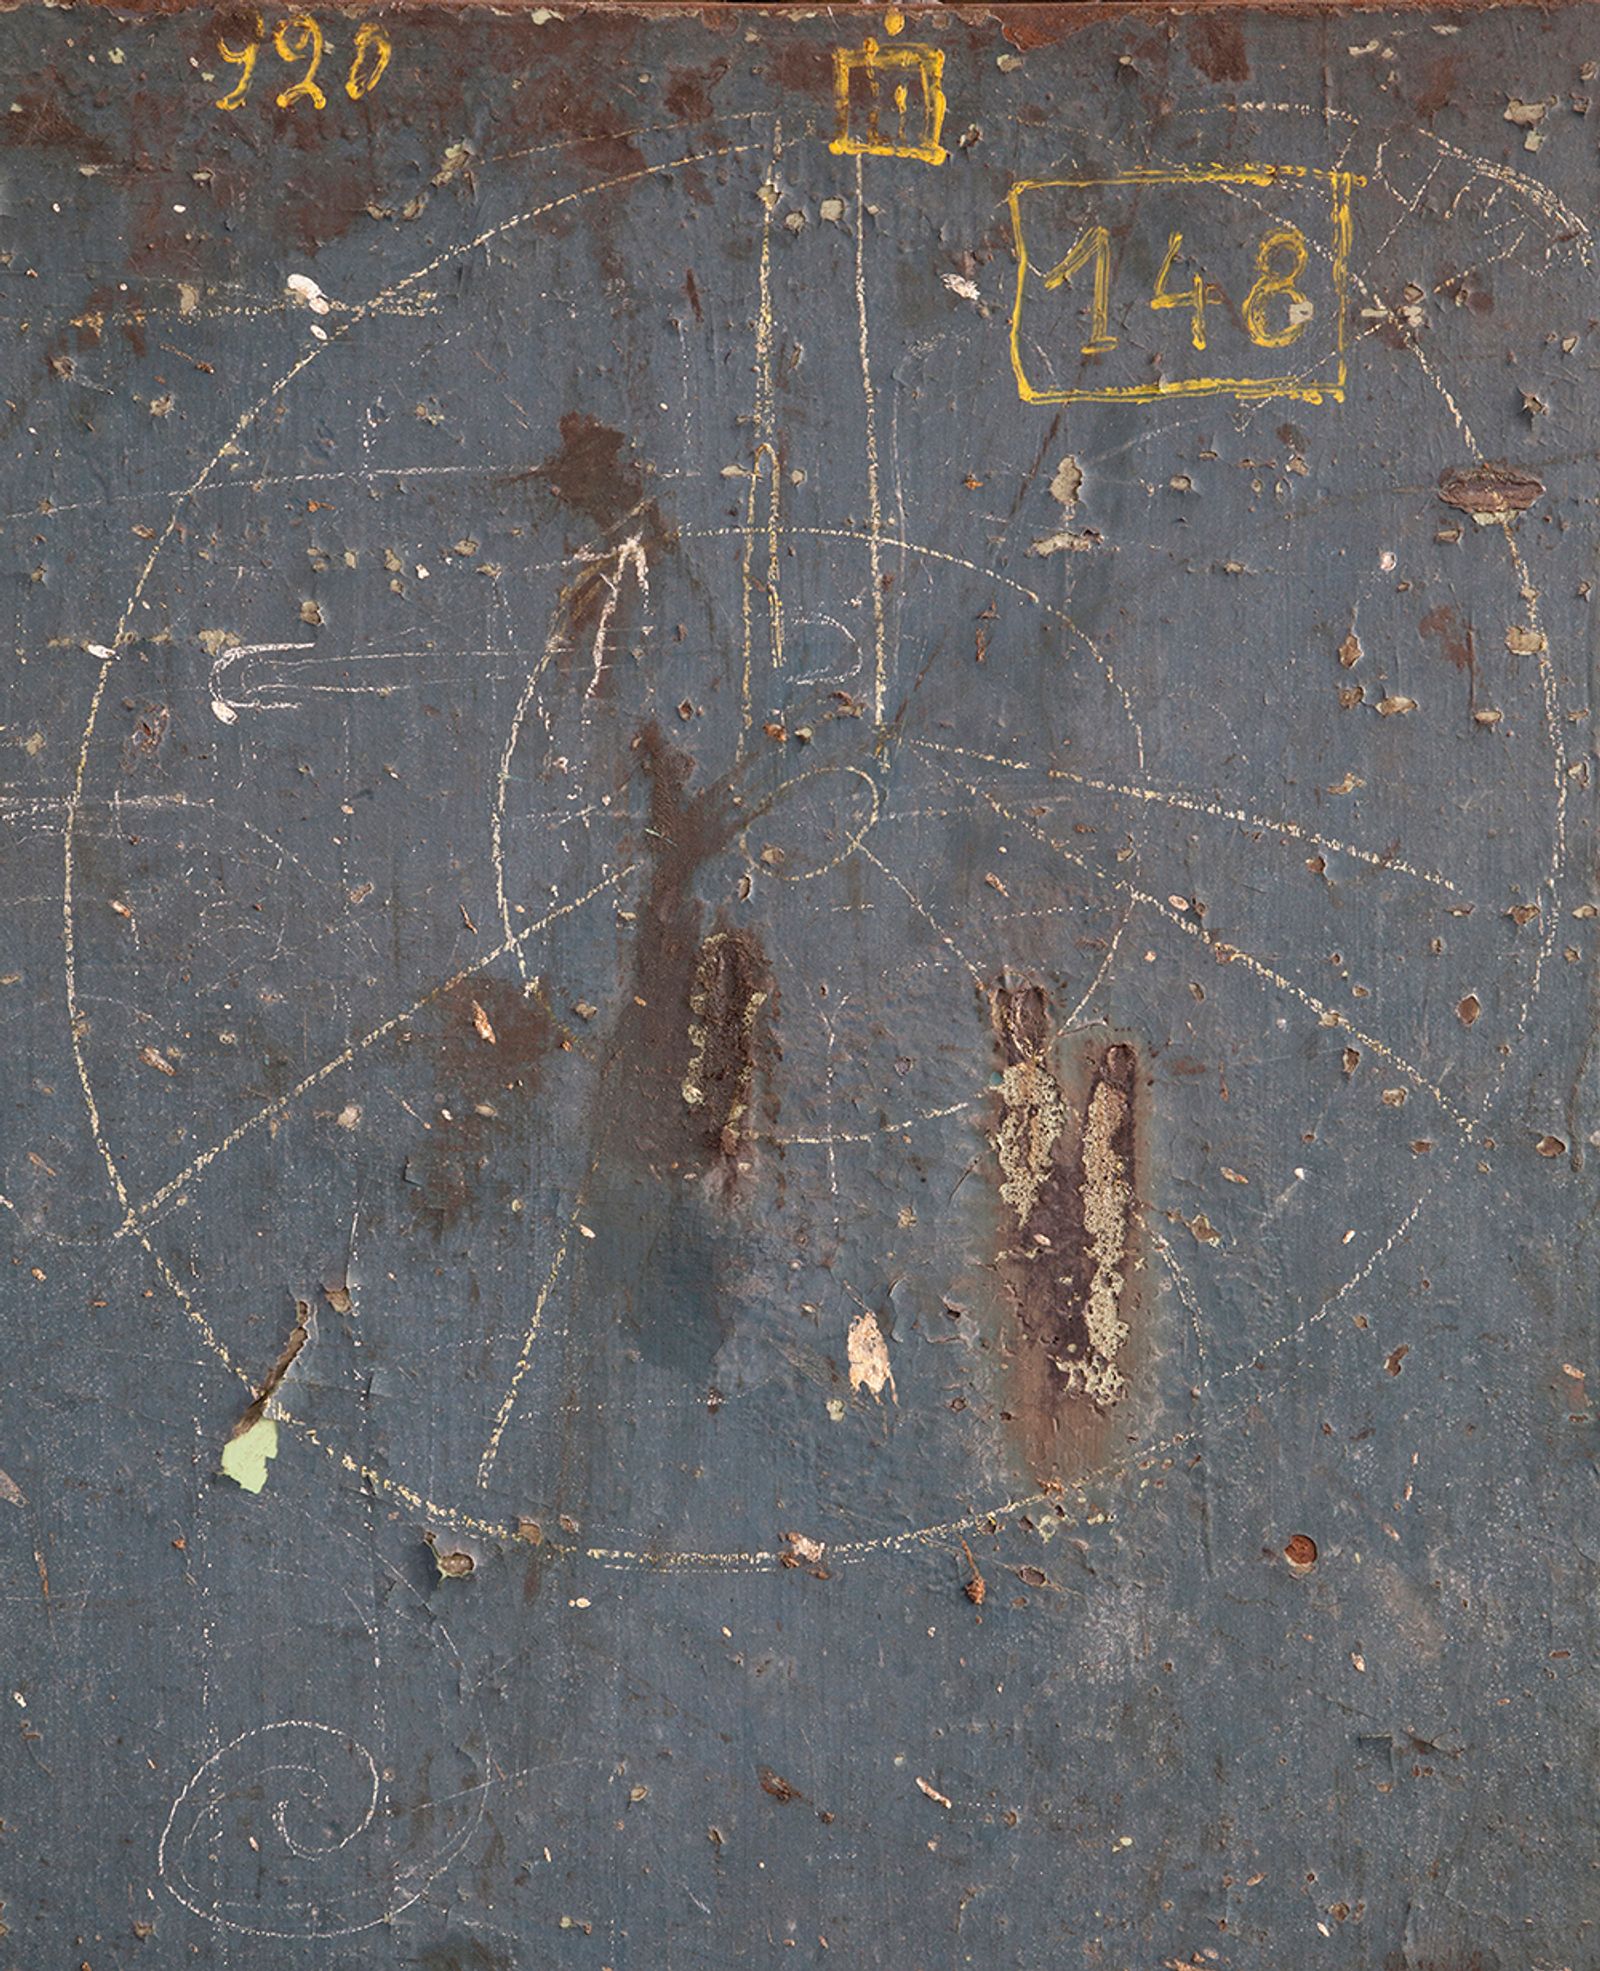 © Ezio D'Agostino - Measurements and calculations on a wall of the Schifflange steel mill.